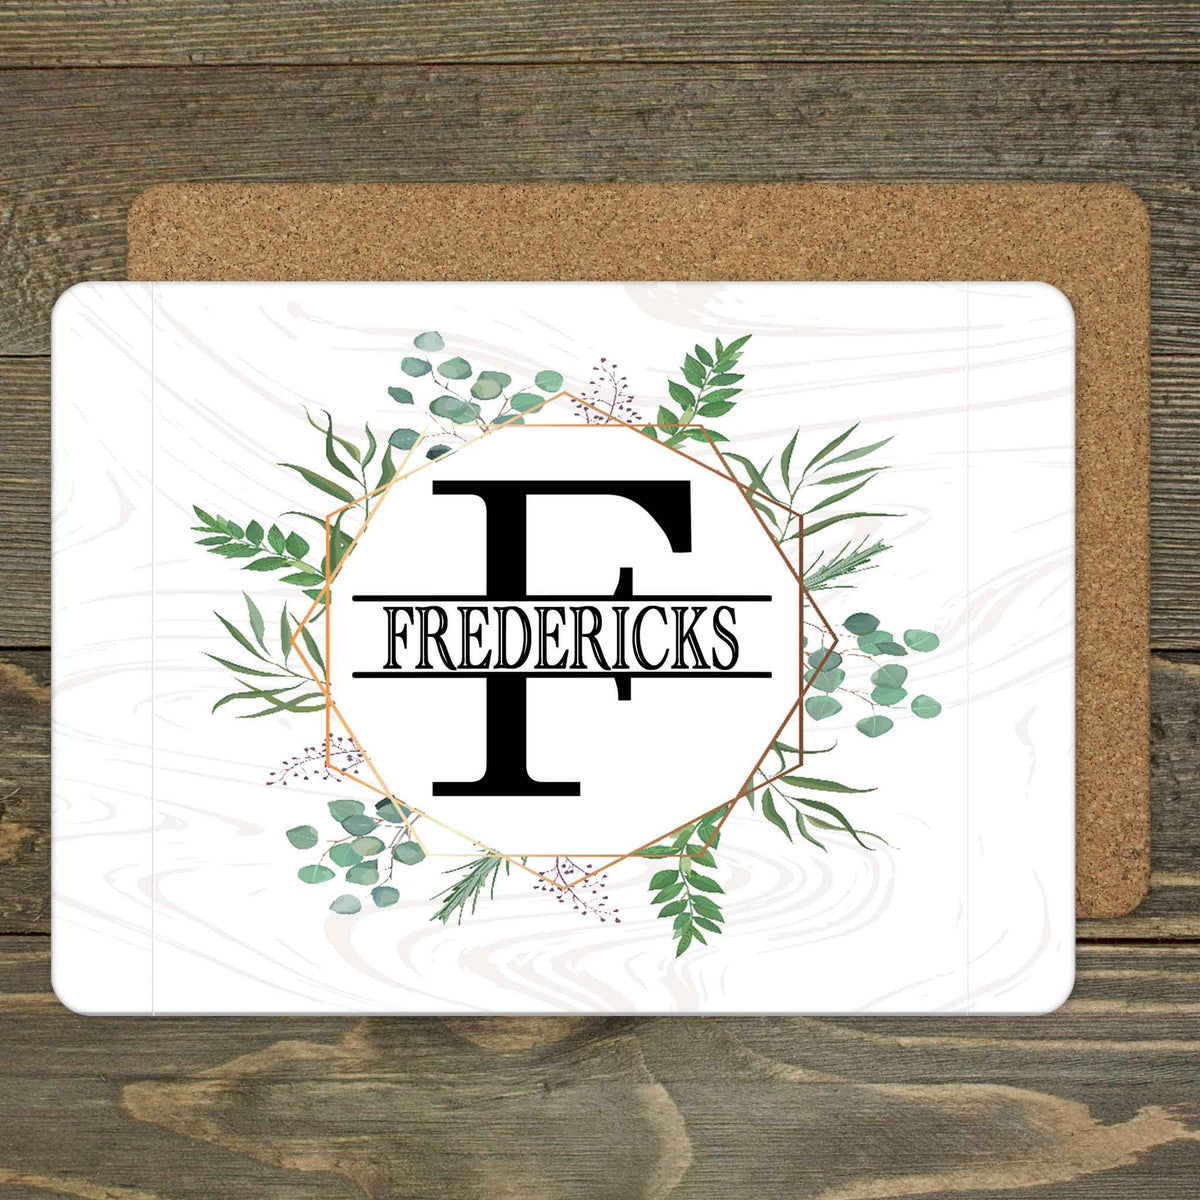 Custom Placemats | Personalized Dining and Serving | Spring Wreath